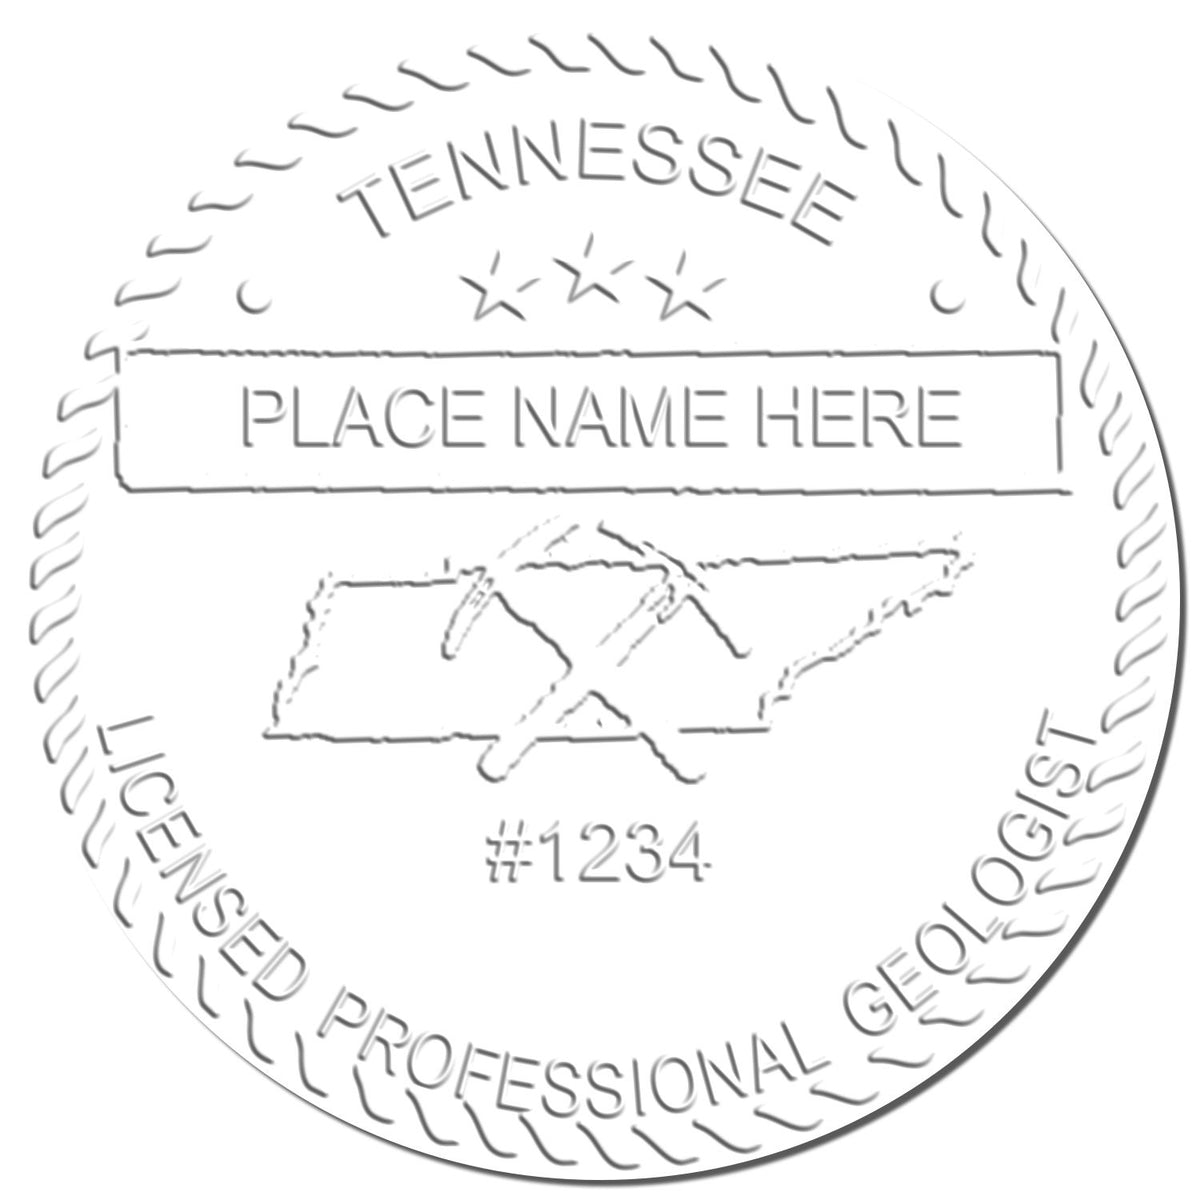 A stamped imprint of the Soft Tennessee Professional Geologist Seal in this stylish lifestyle photo, setting the tone for a unique and personalized product.